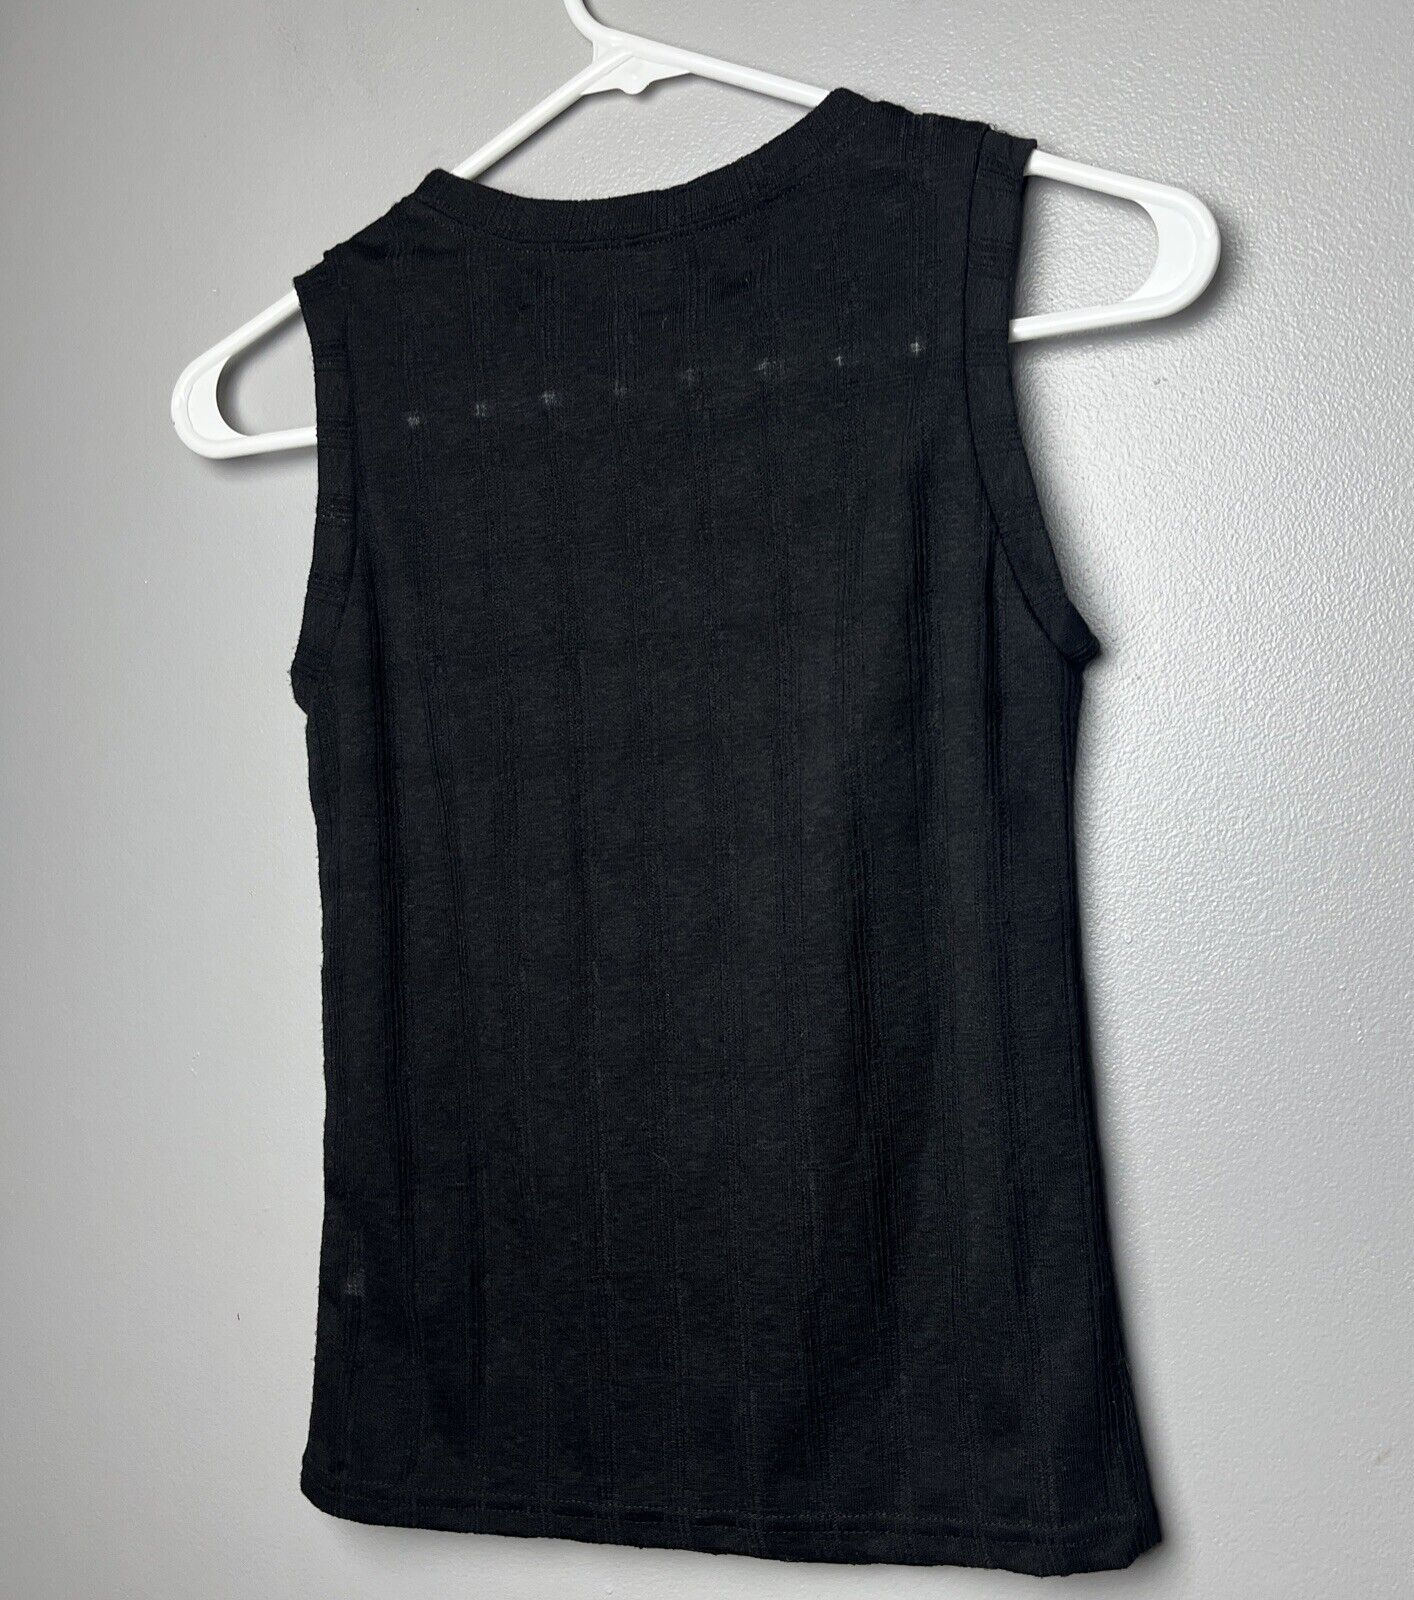 Code X Mode Women’s Black Crew Neck Sleeveless Ribbed Knitted Top Size X Small